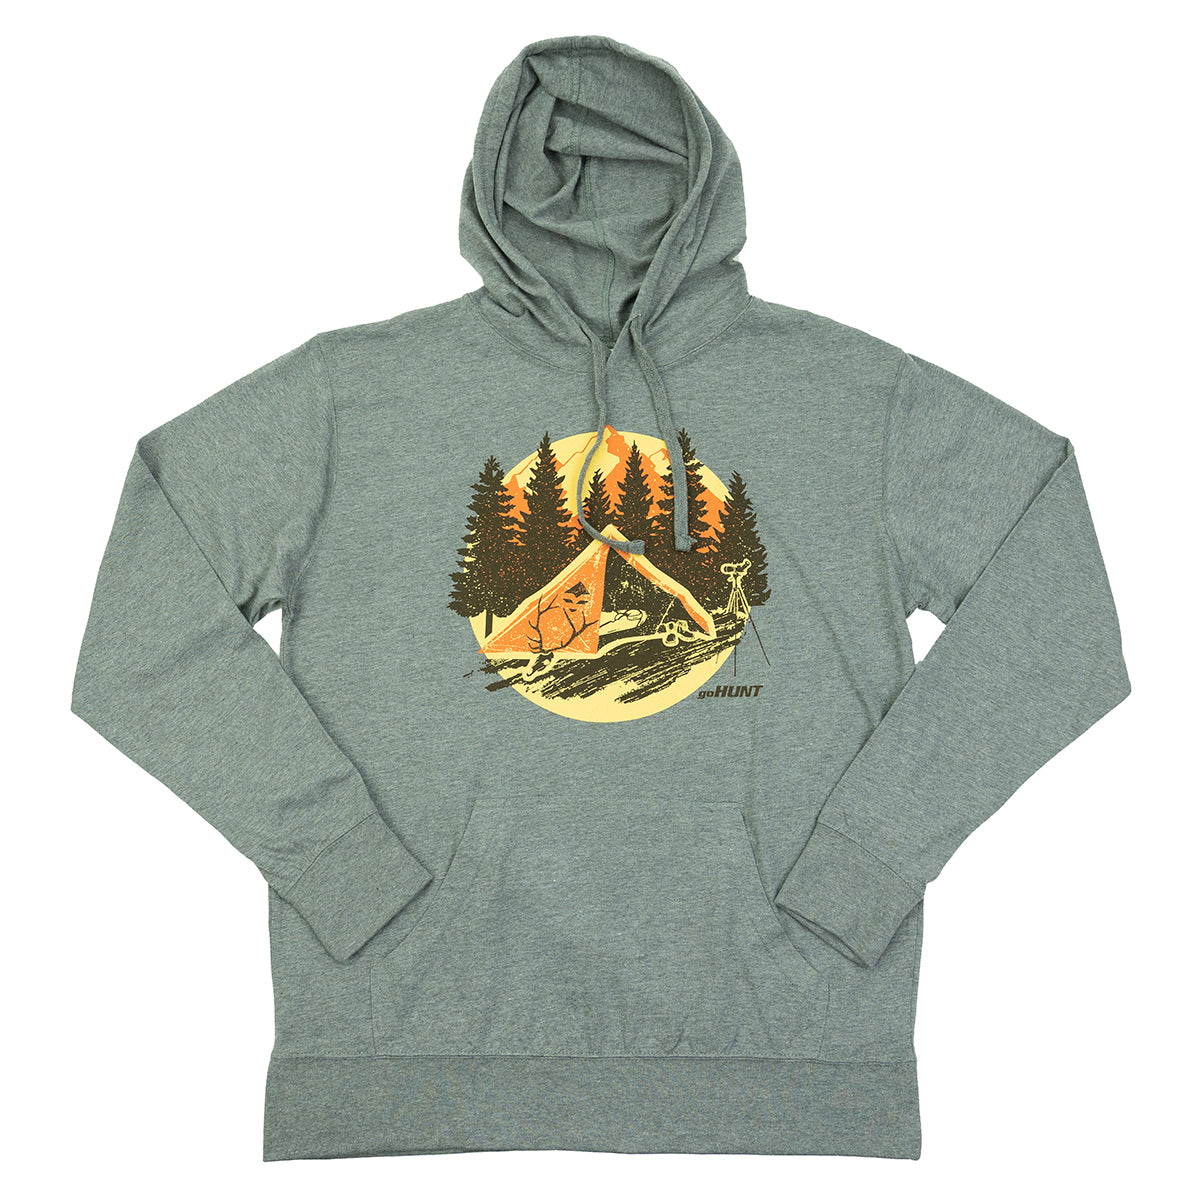 The Lightweight Wilderness Hoodie in The Lightweight Wilderness Hoodie by goHUNT | Apparel - goHUNT Shop by GOHUNT | GOHUNT - GOHUNT Shop